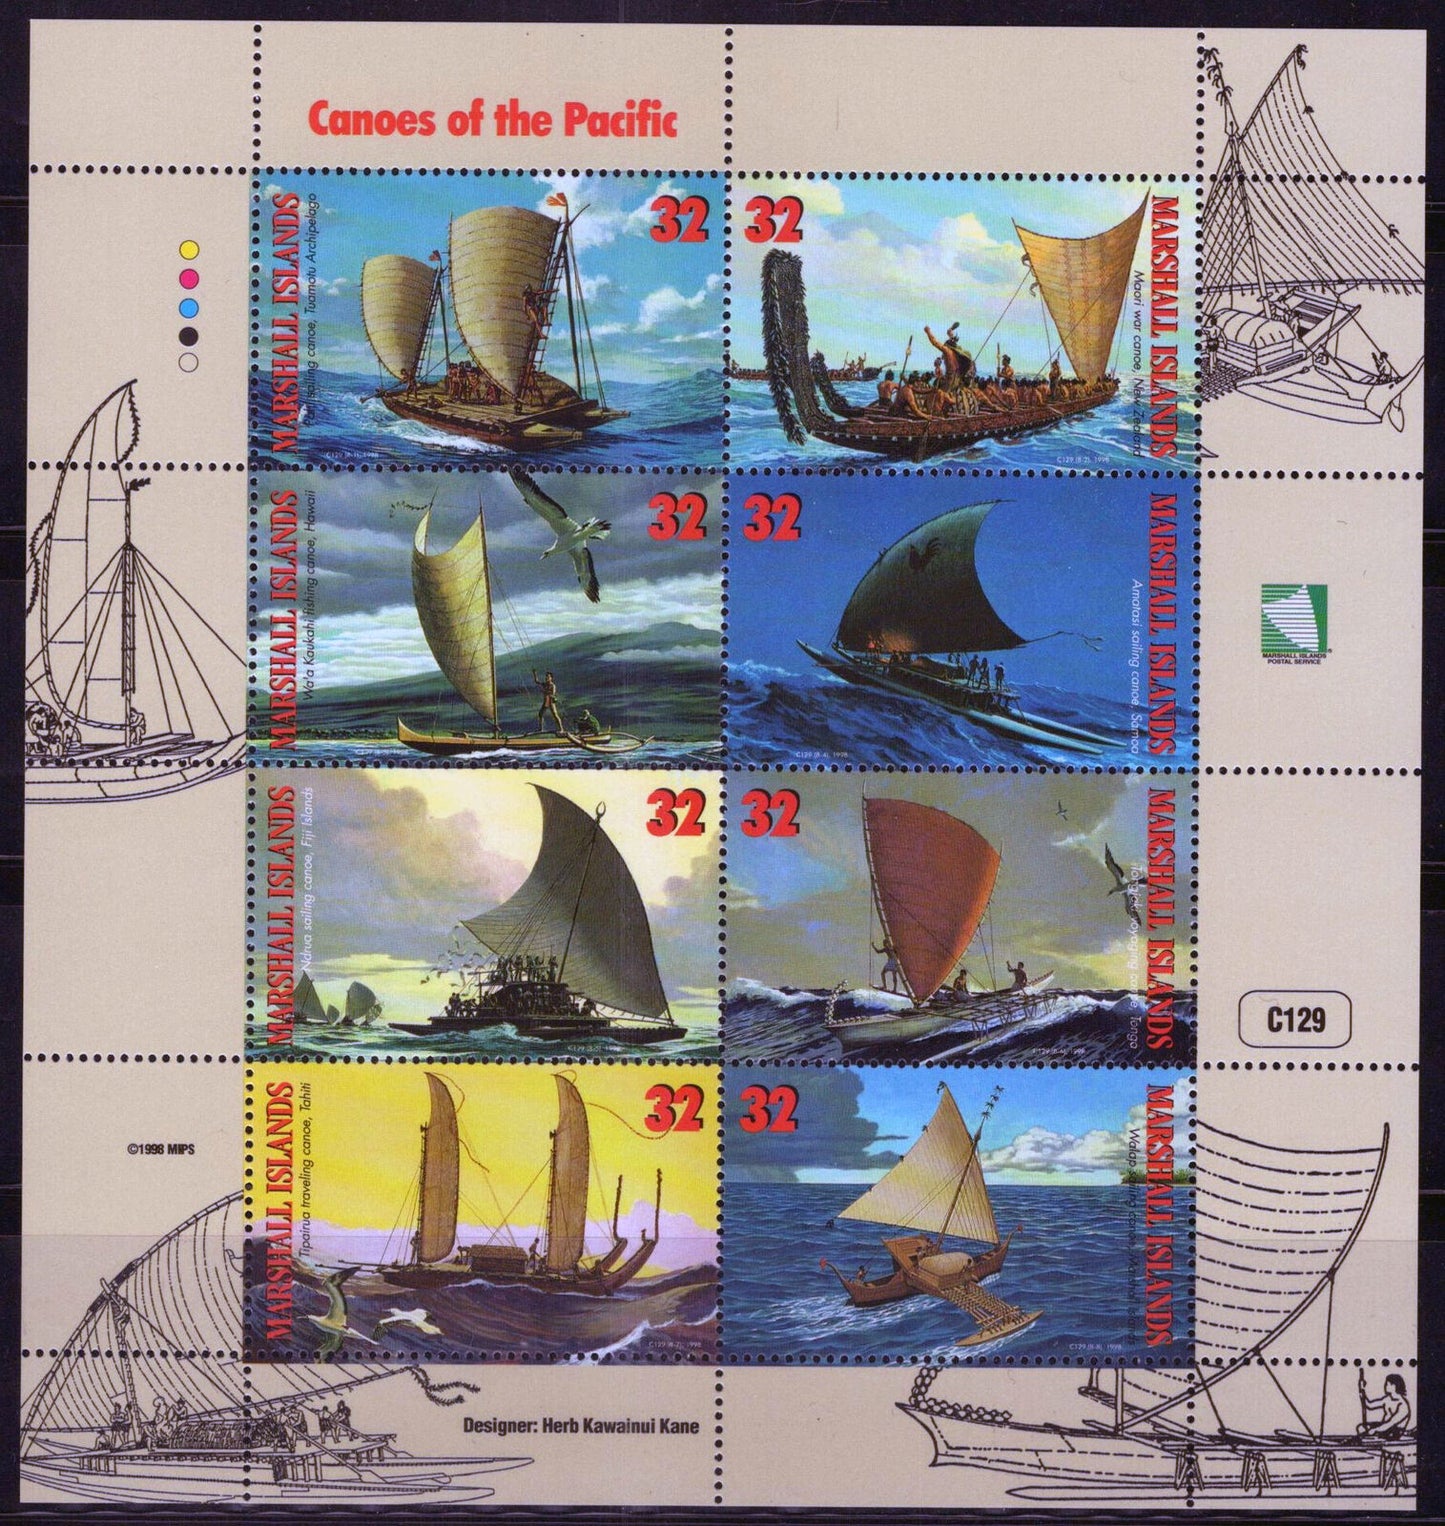 ZAYIX Marshall Islands 655 MNH Canoes of the Pacific  092023SL12M